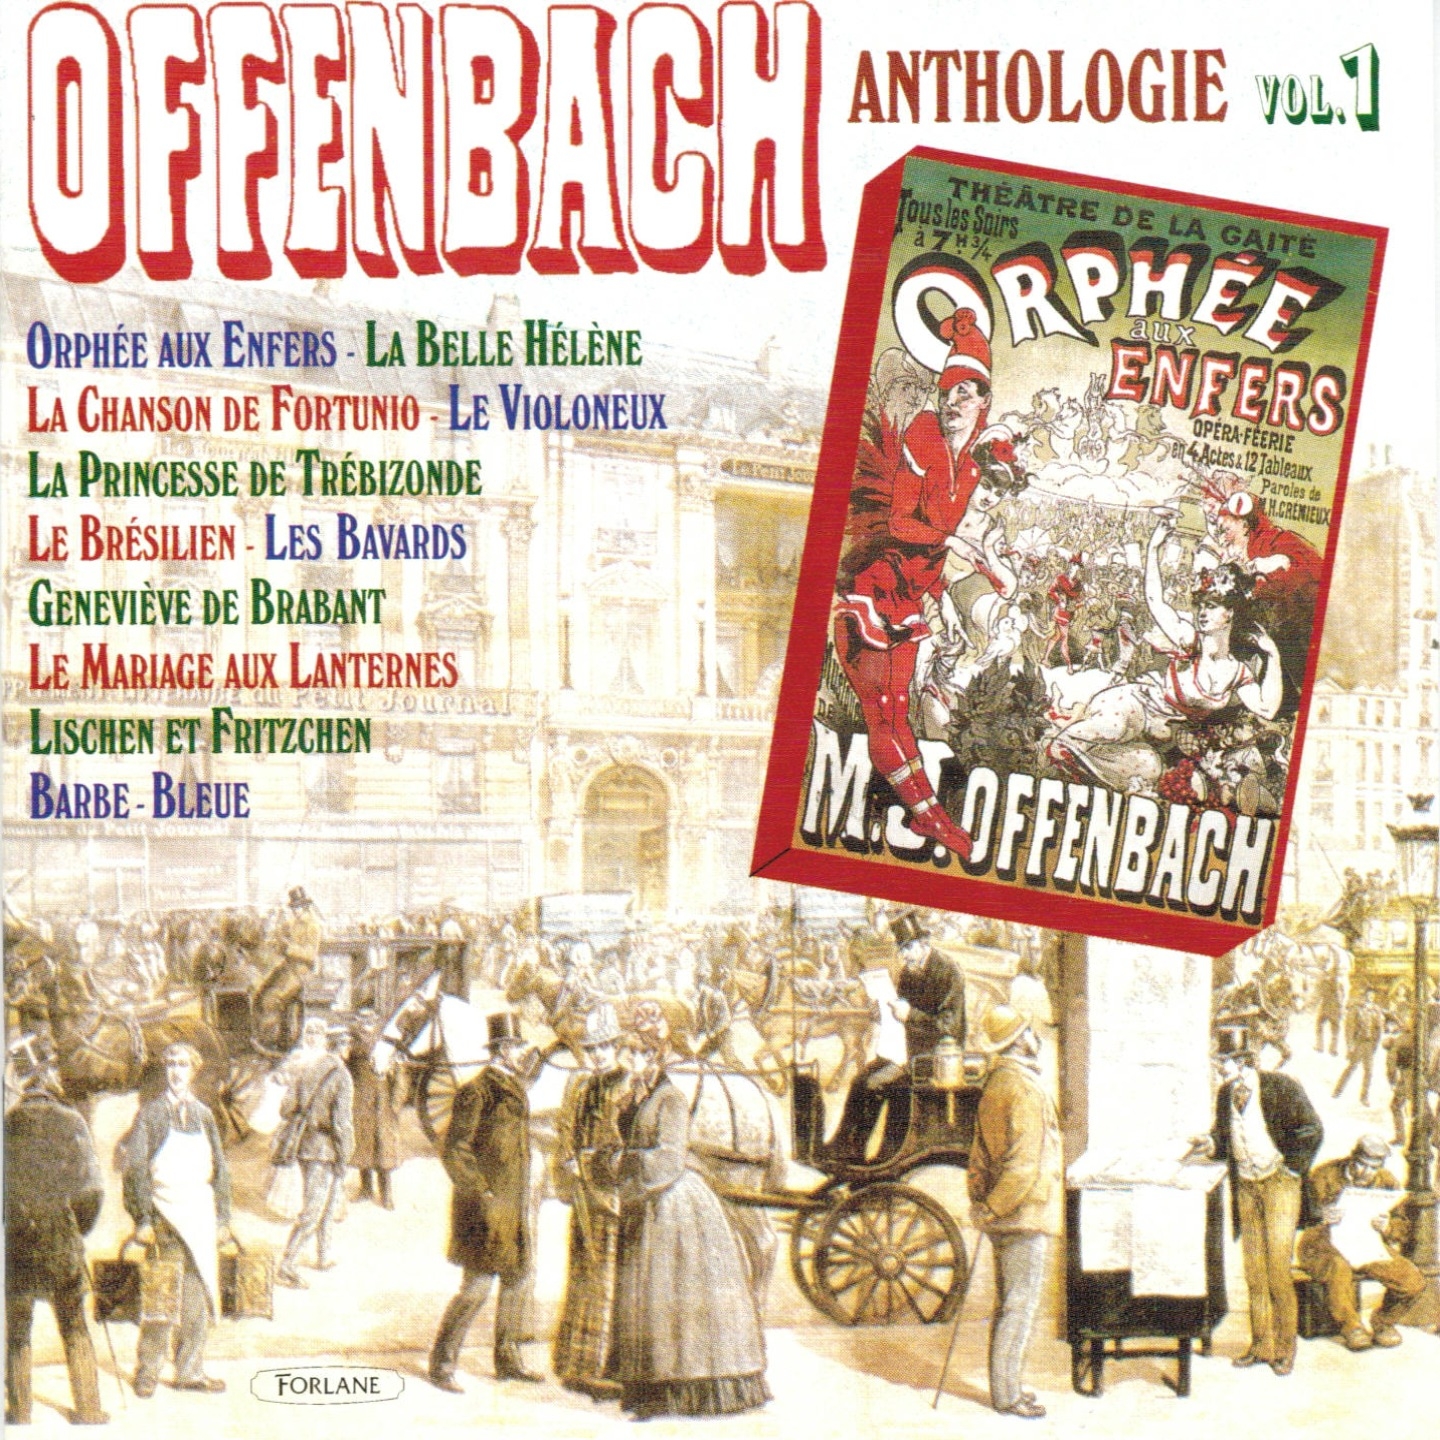 Offenbach : Anthologie, vol. 1